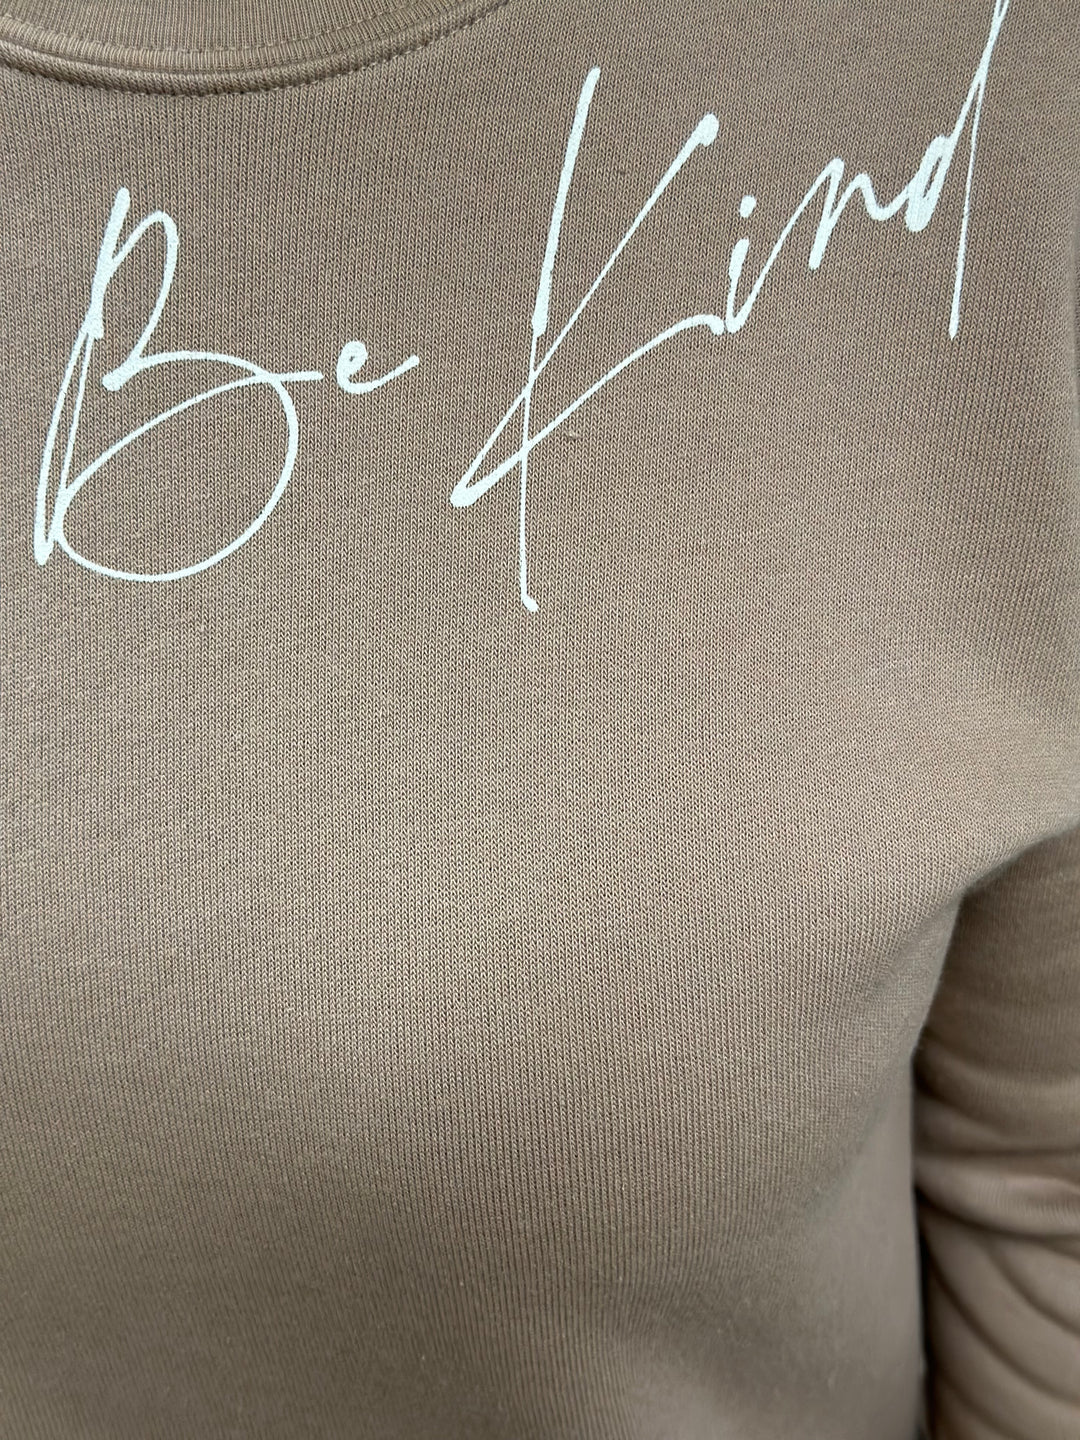 Be Kind Graphic Sweatshirt-Graphic Sweaters-Oat Collective-Evergreen Boutique, Women’s Fashion Boutique in Santa Claus, Indiana